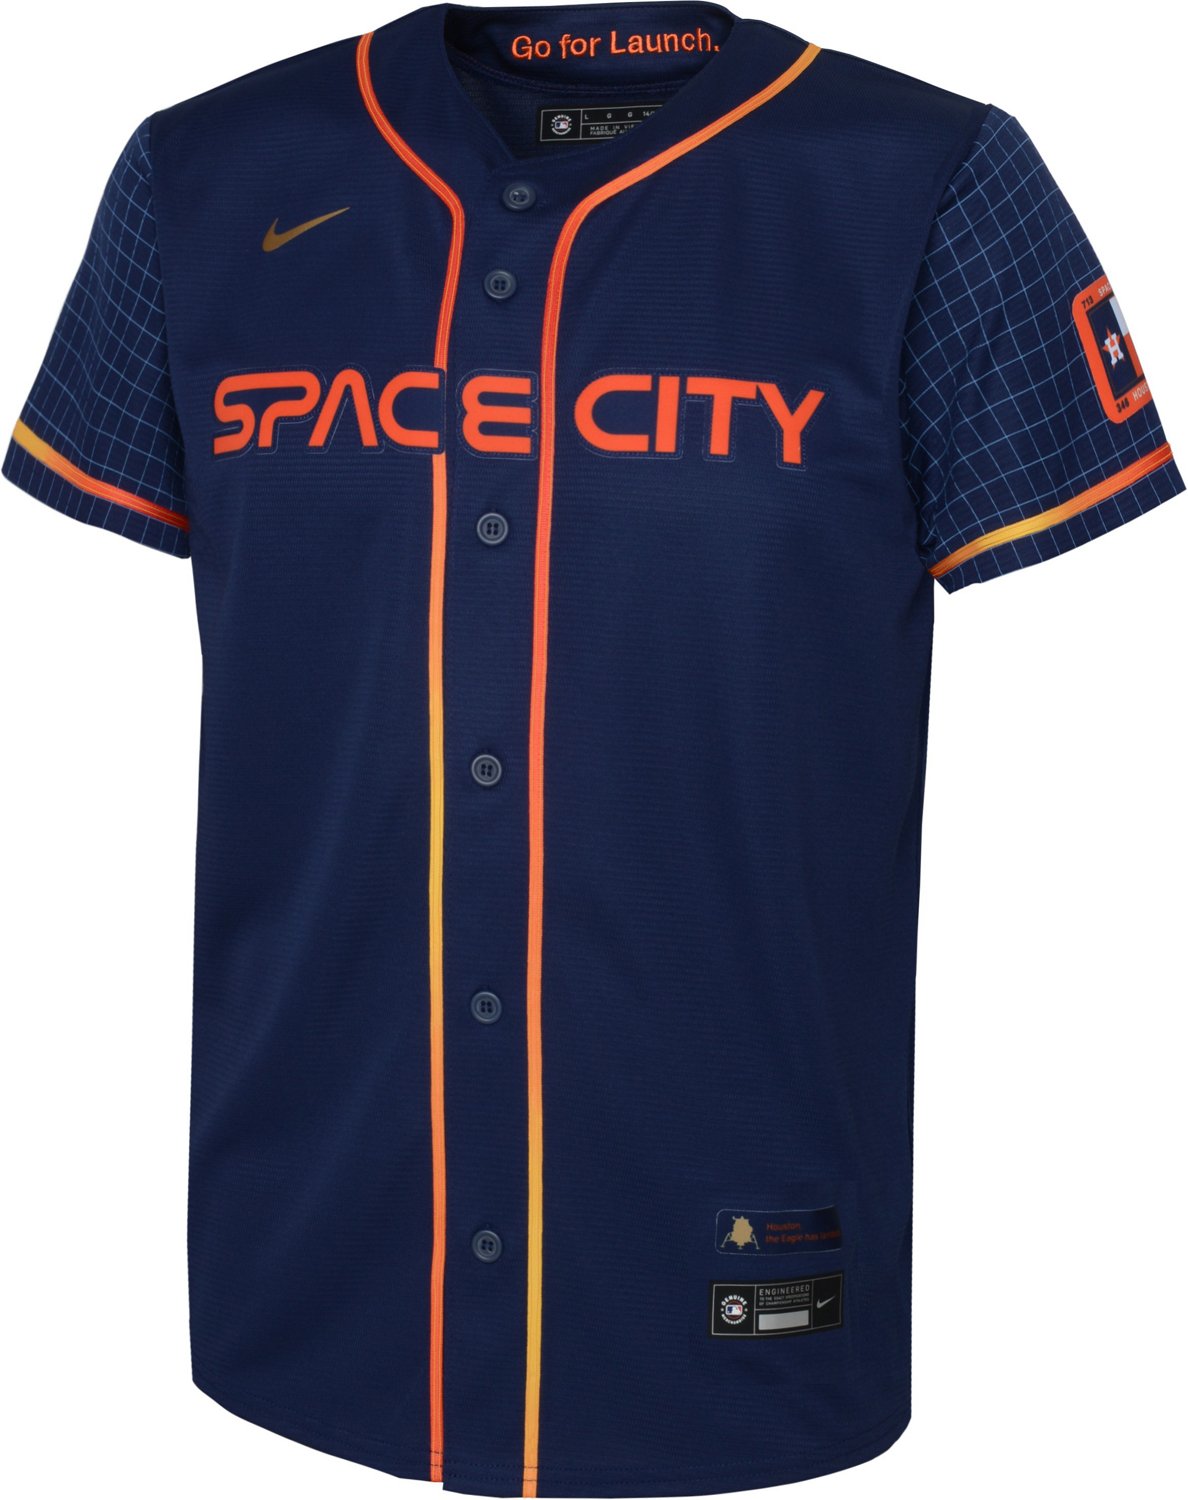 3t astros jersey